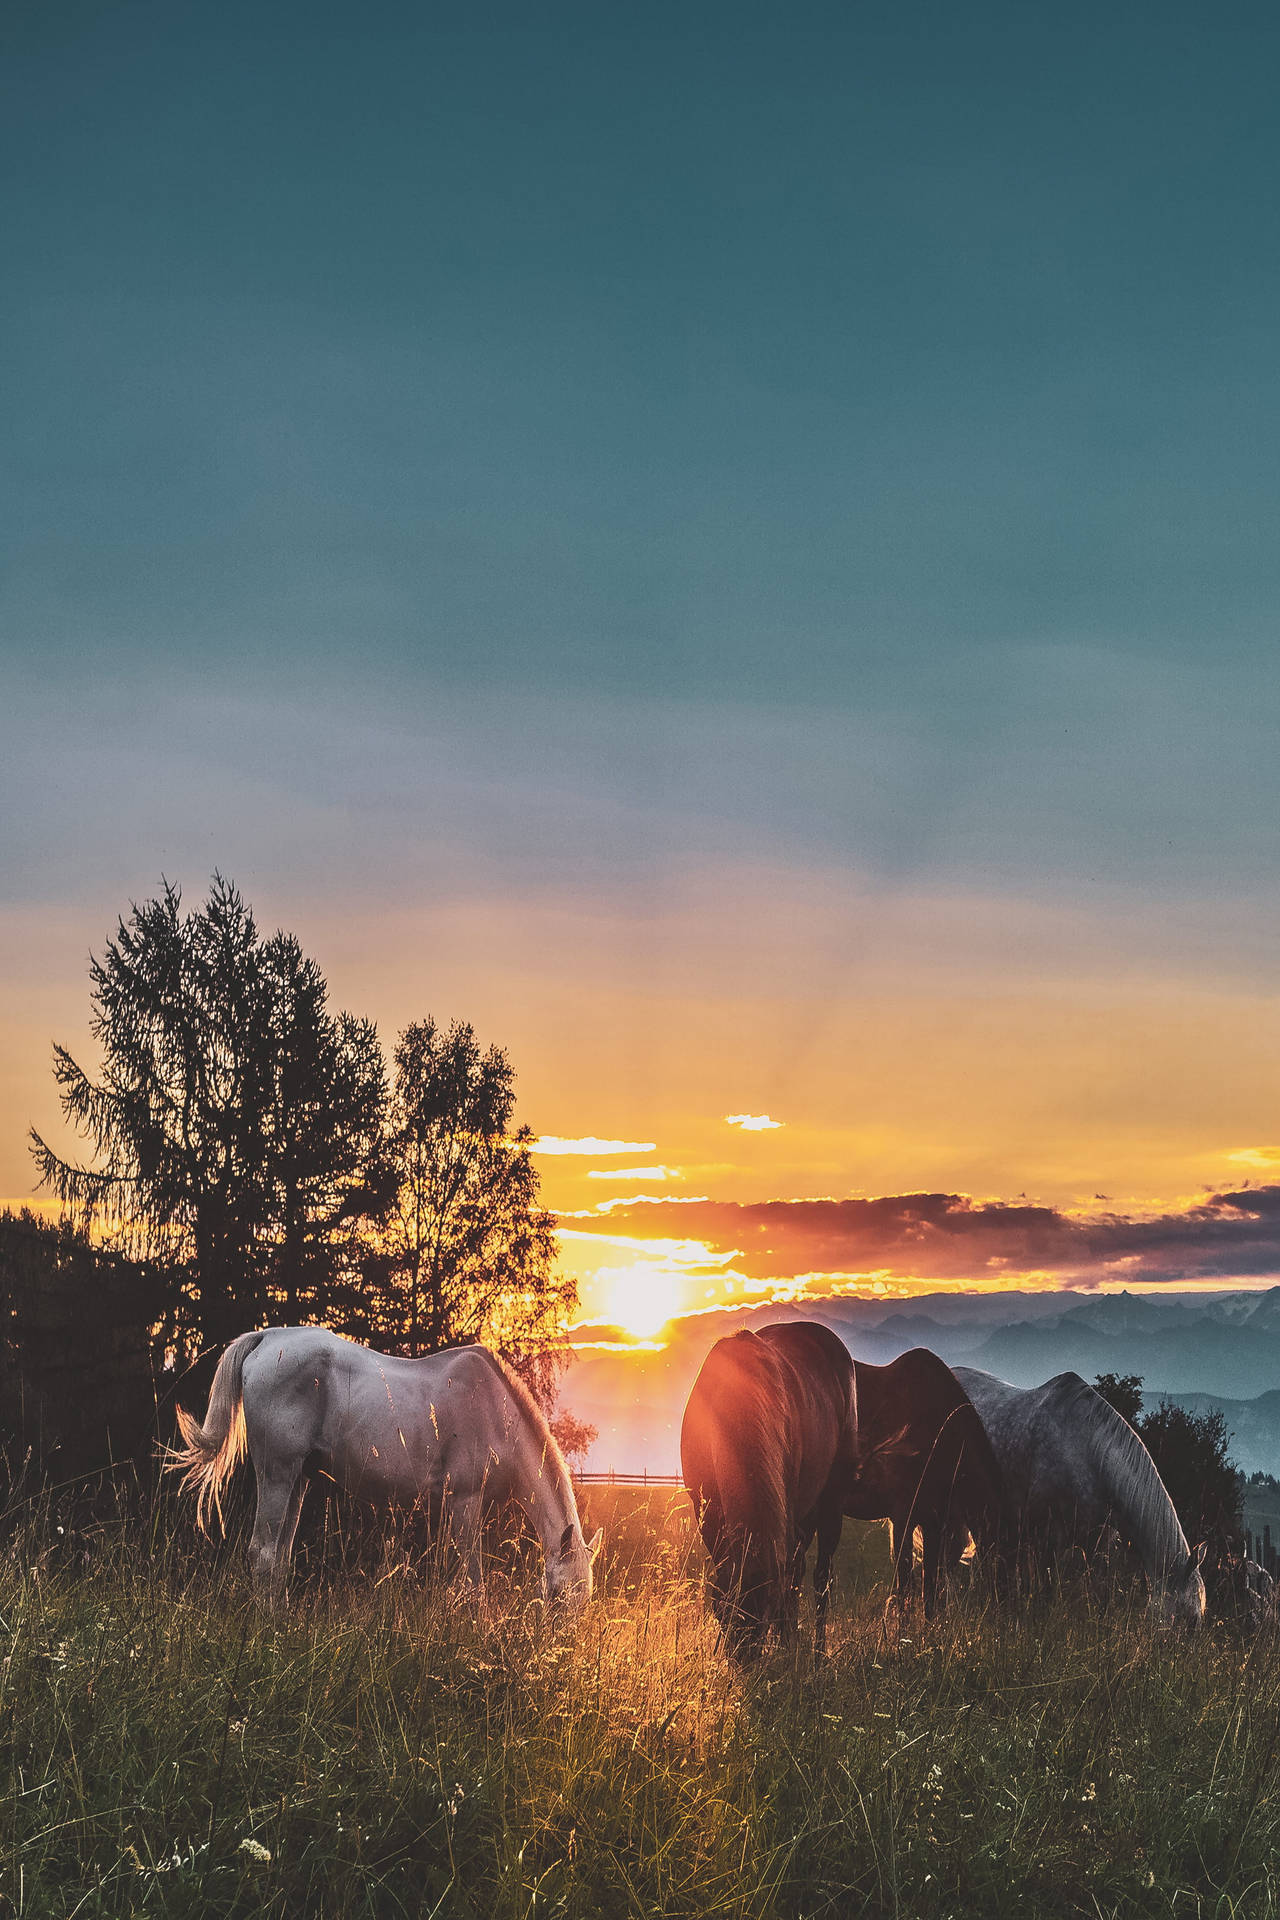 Horses And Sunset On Iphone Landscape Wallpaper